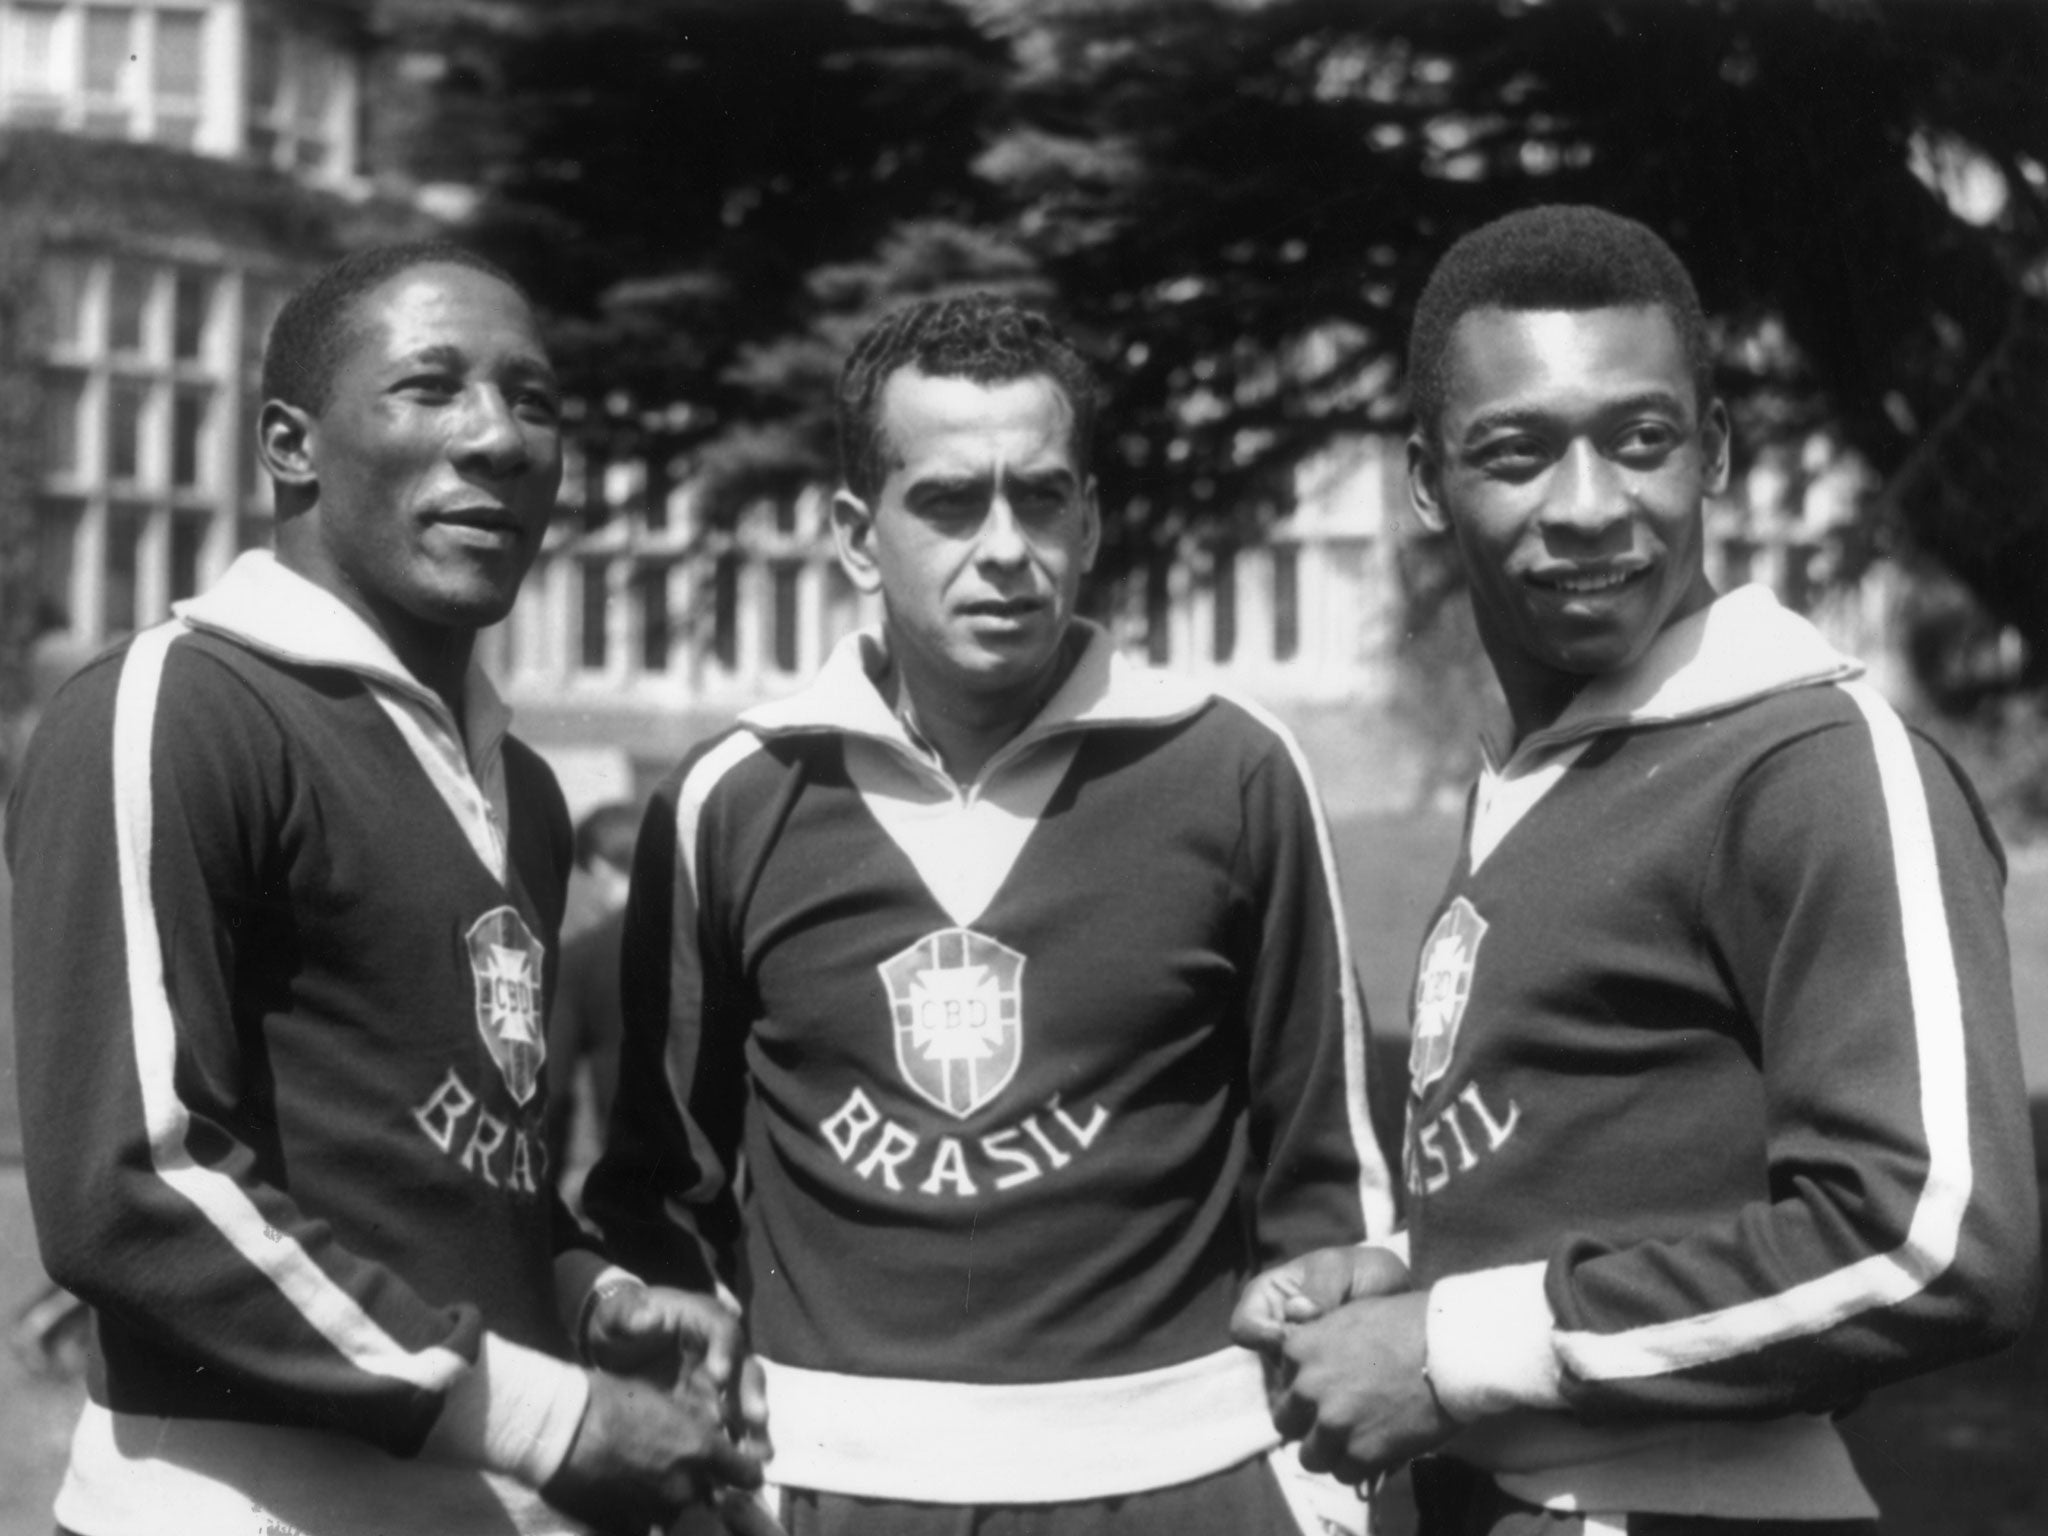 Santos, left, with Zito and Pele in 1963